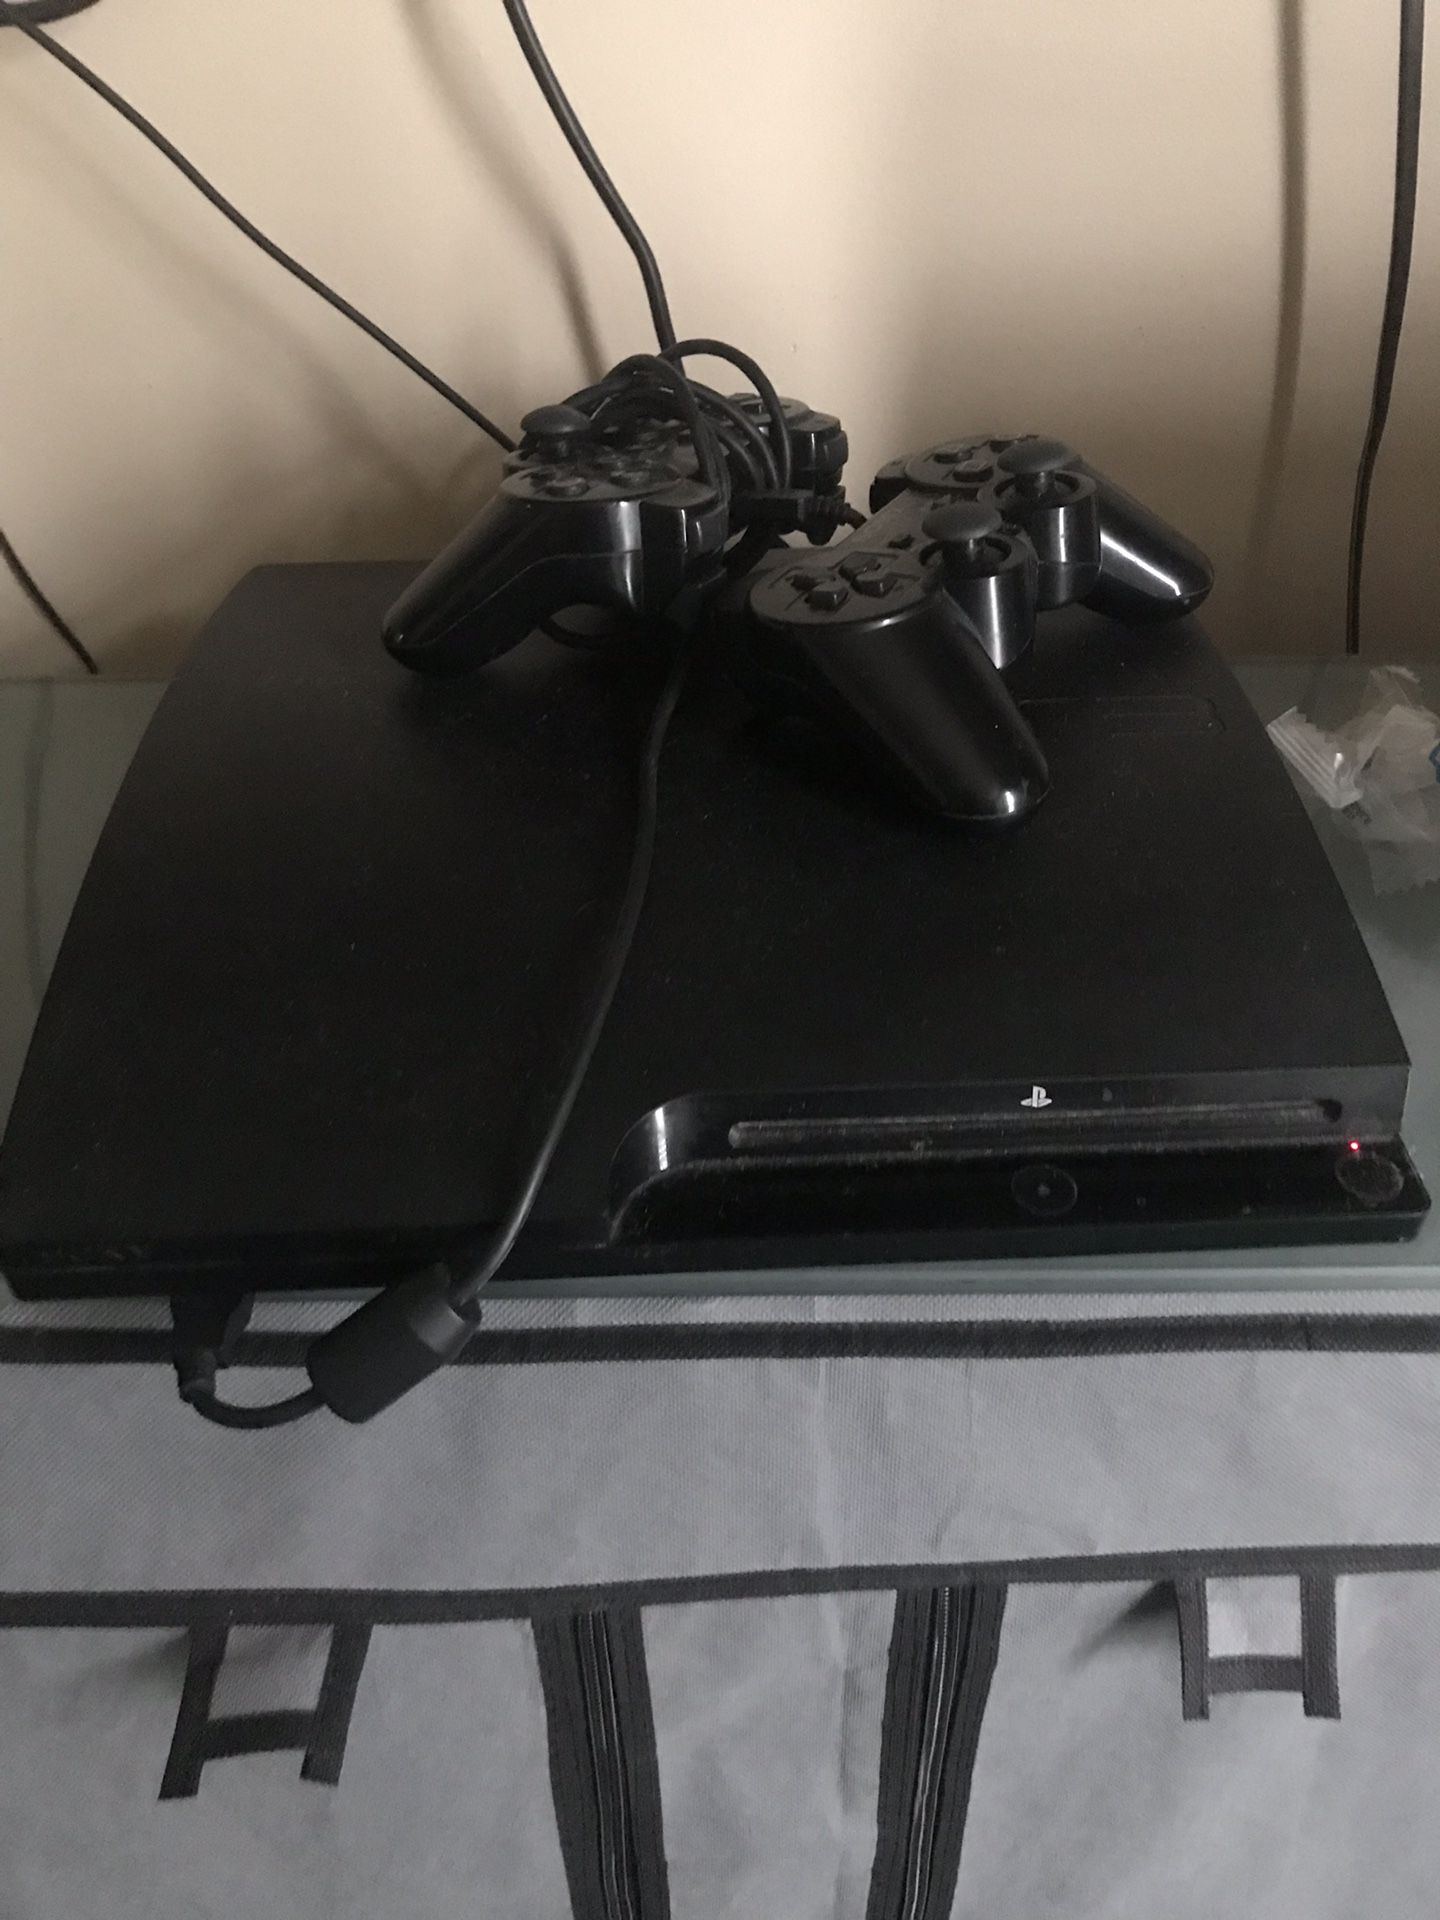 Ps3 and 8 games with 2 controllers